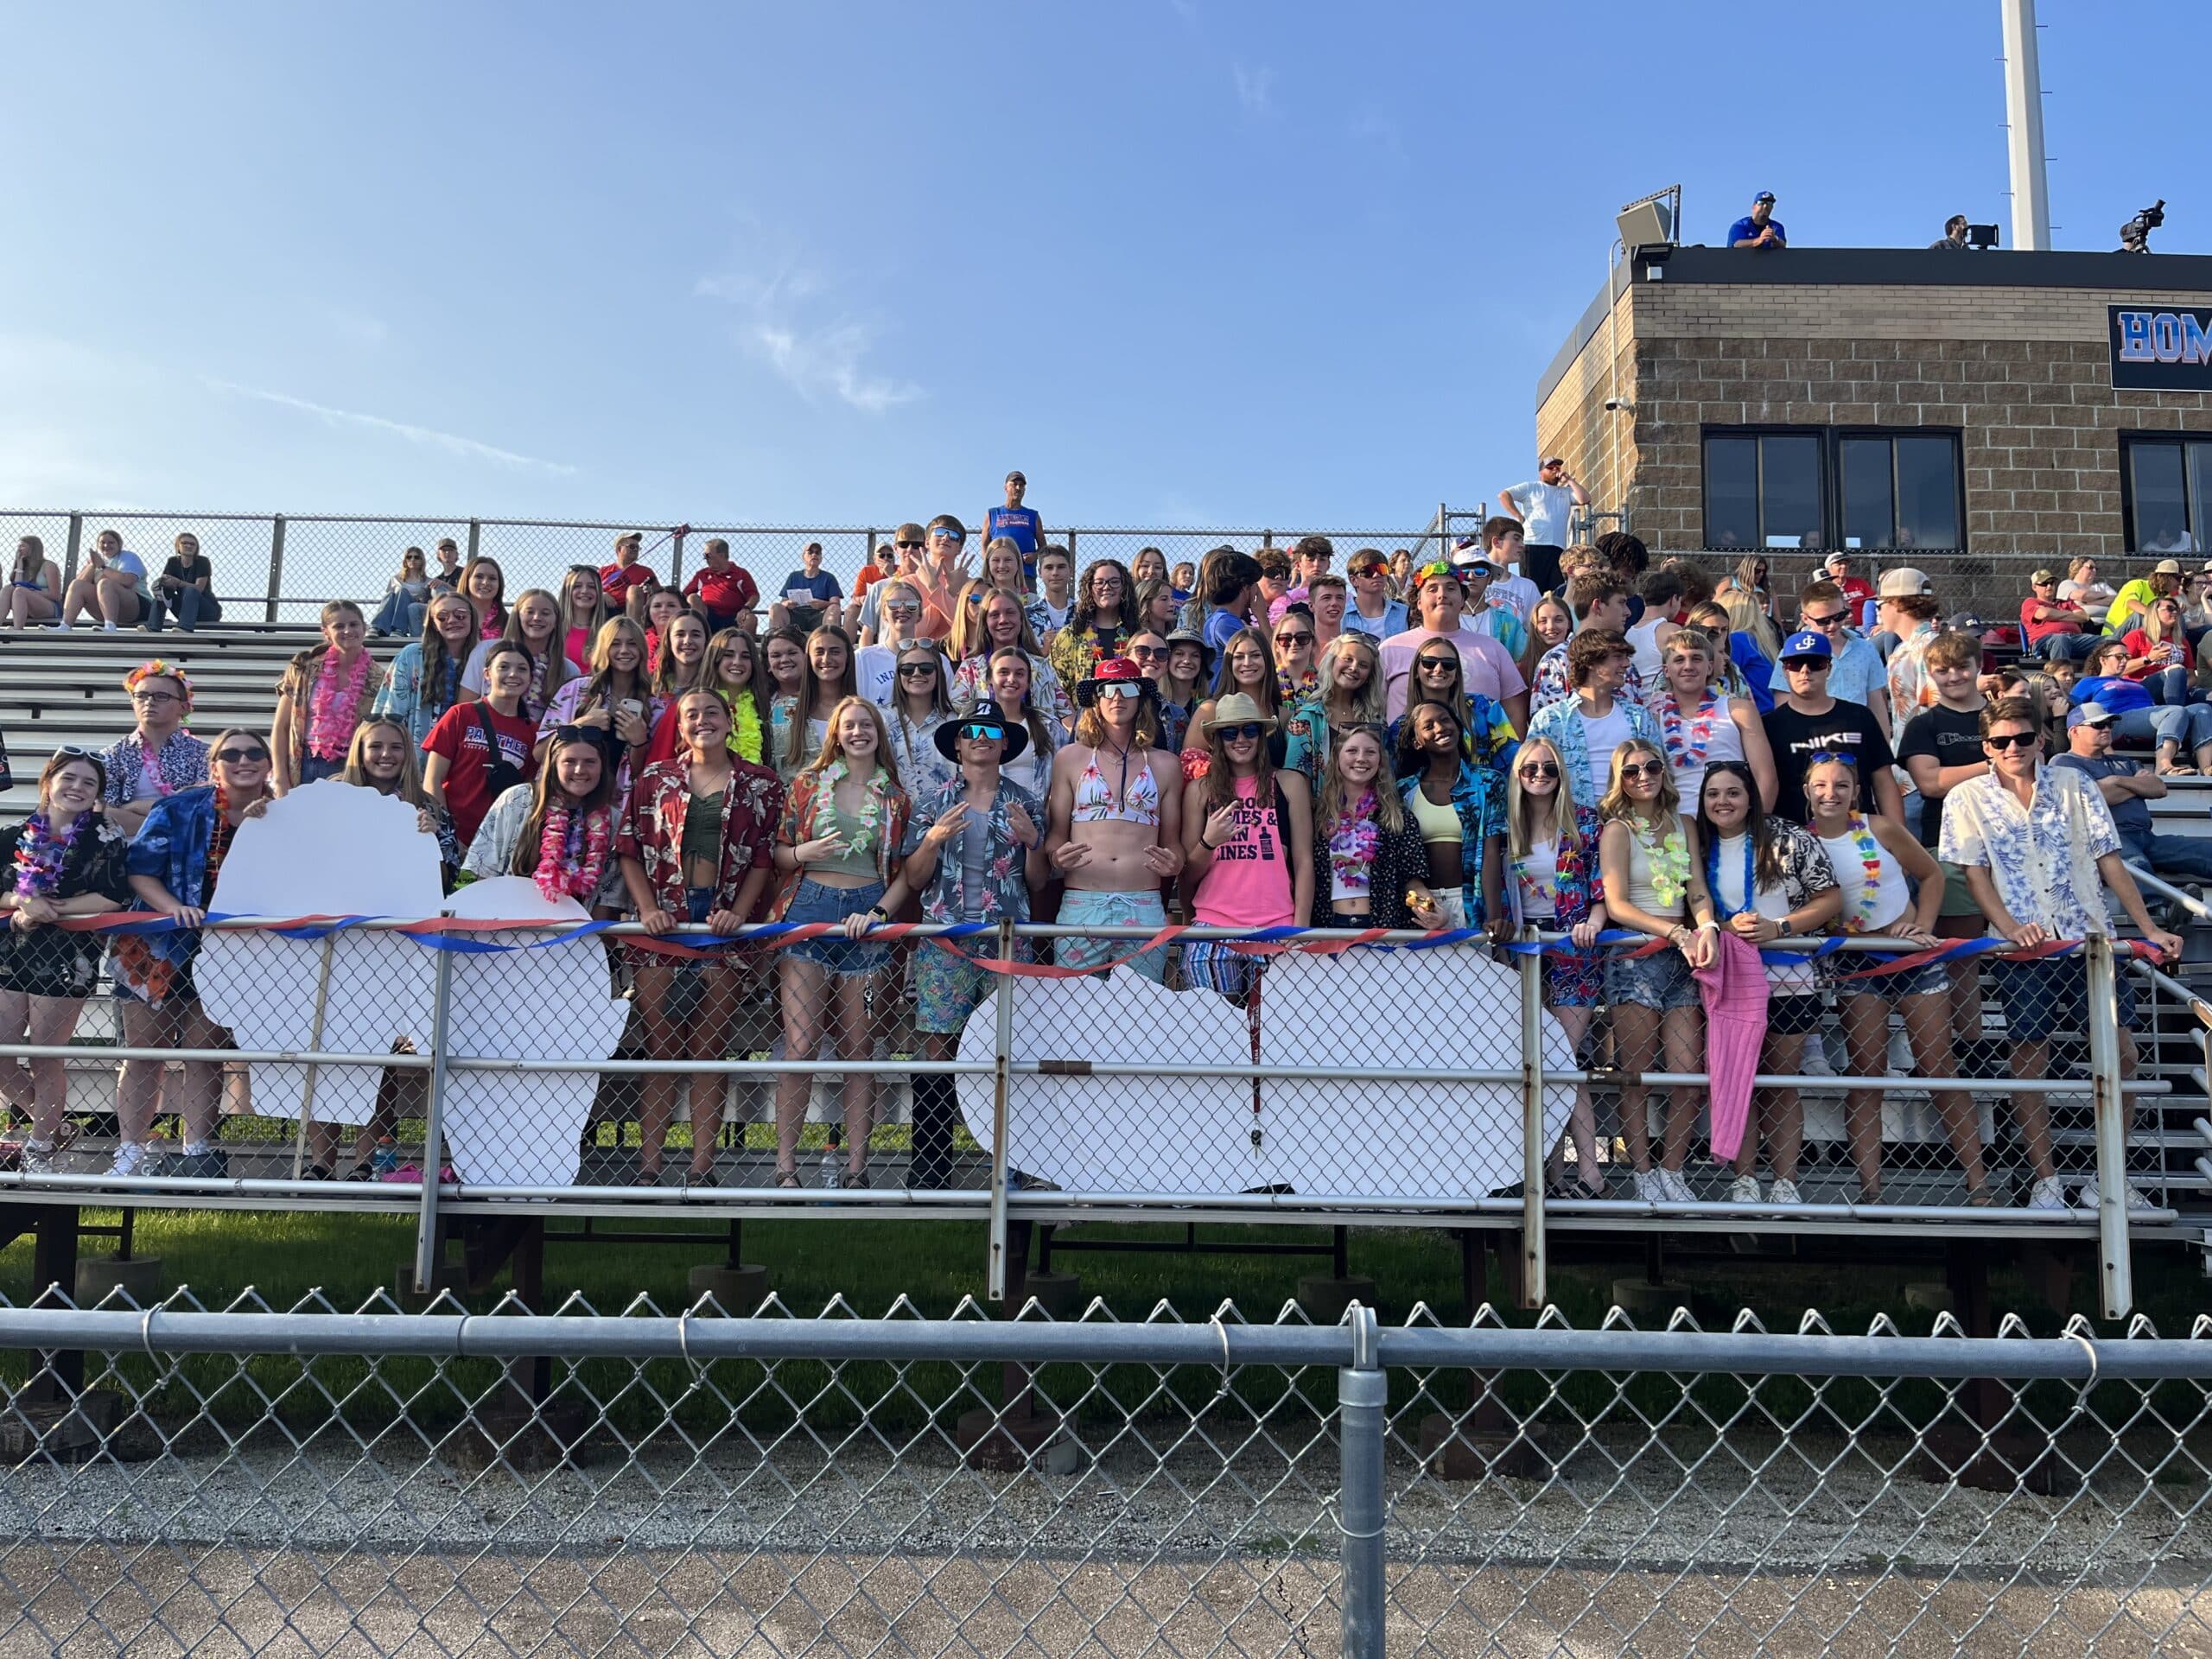 Jennings County High School student section, dressed in Hawaiian gear, standing and smiling in the stands, adding a tropical flair to the event.